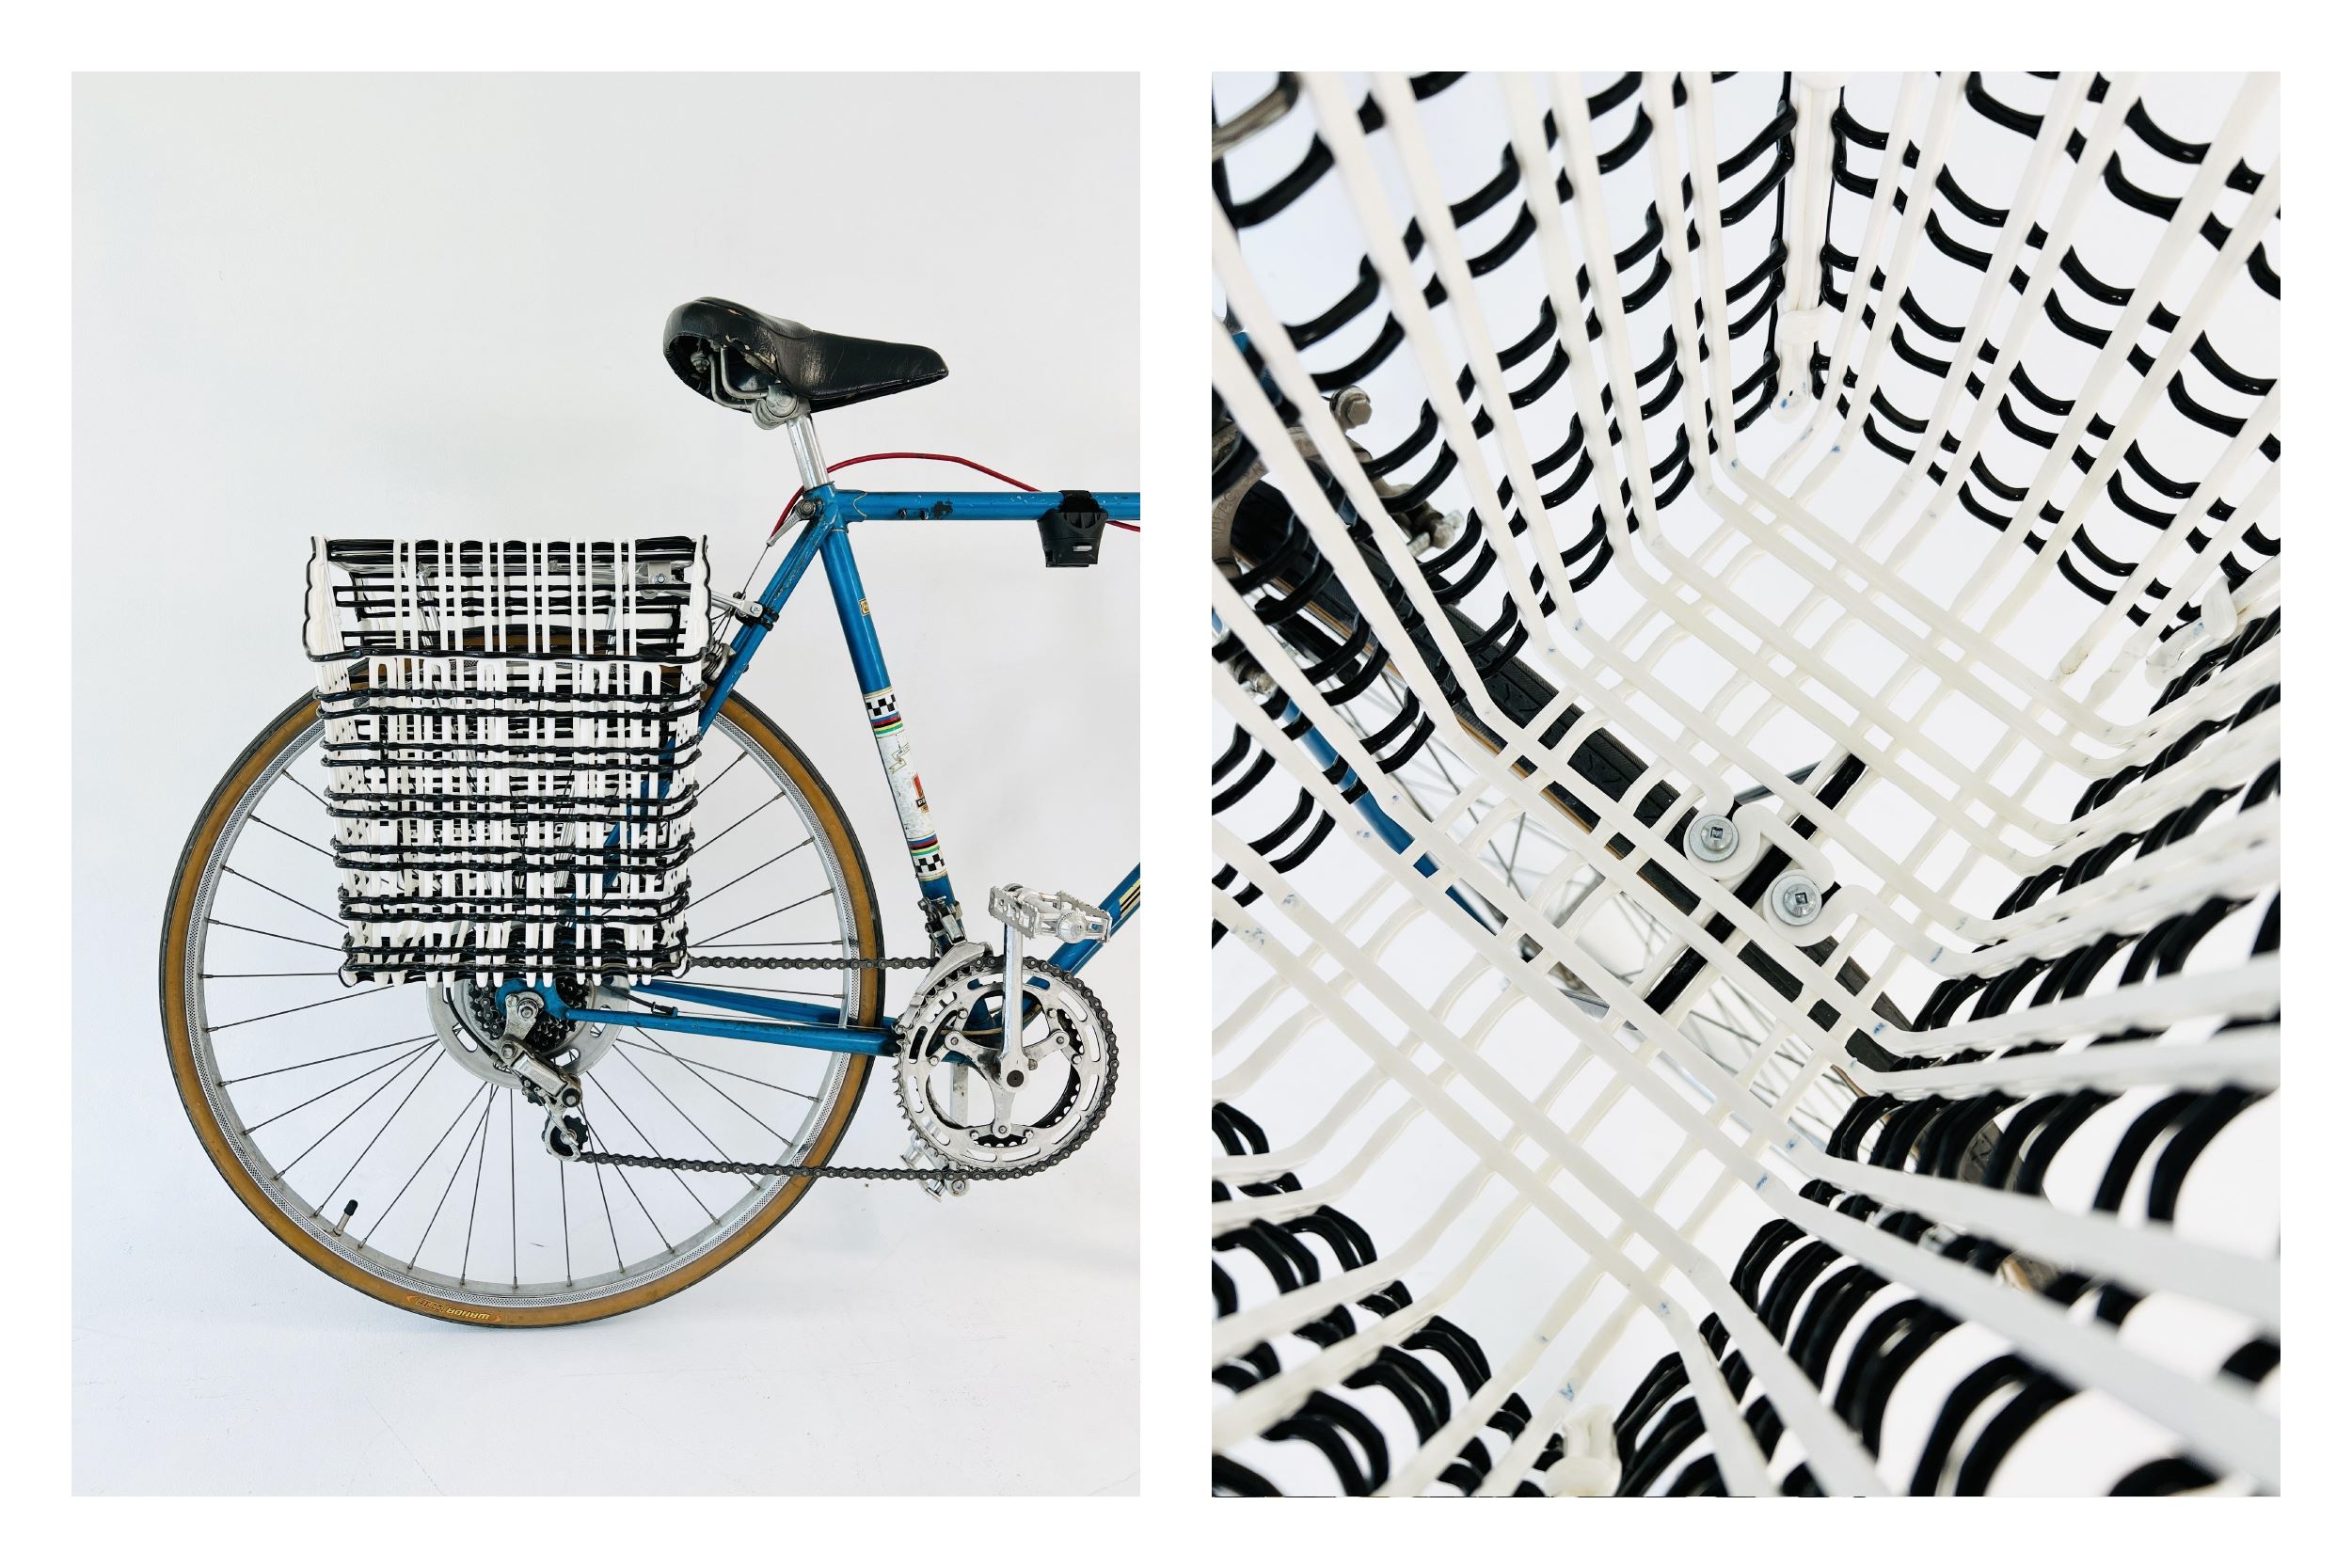 Black and white plastic lines are melted into the shape of bike pannier baskets.